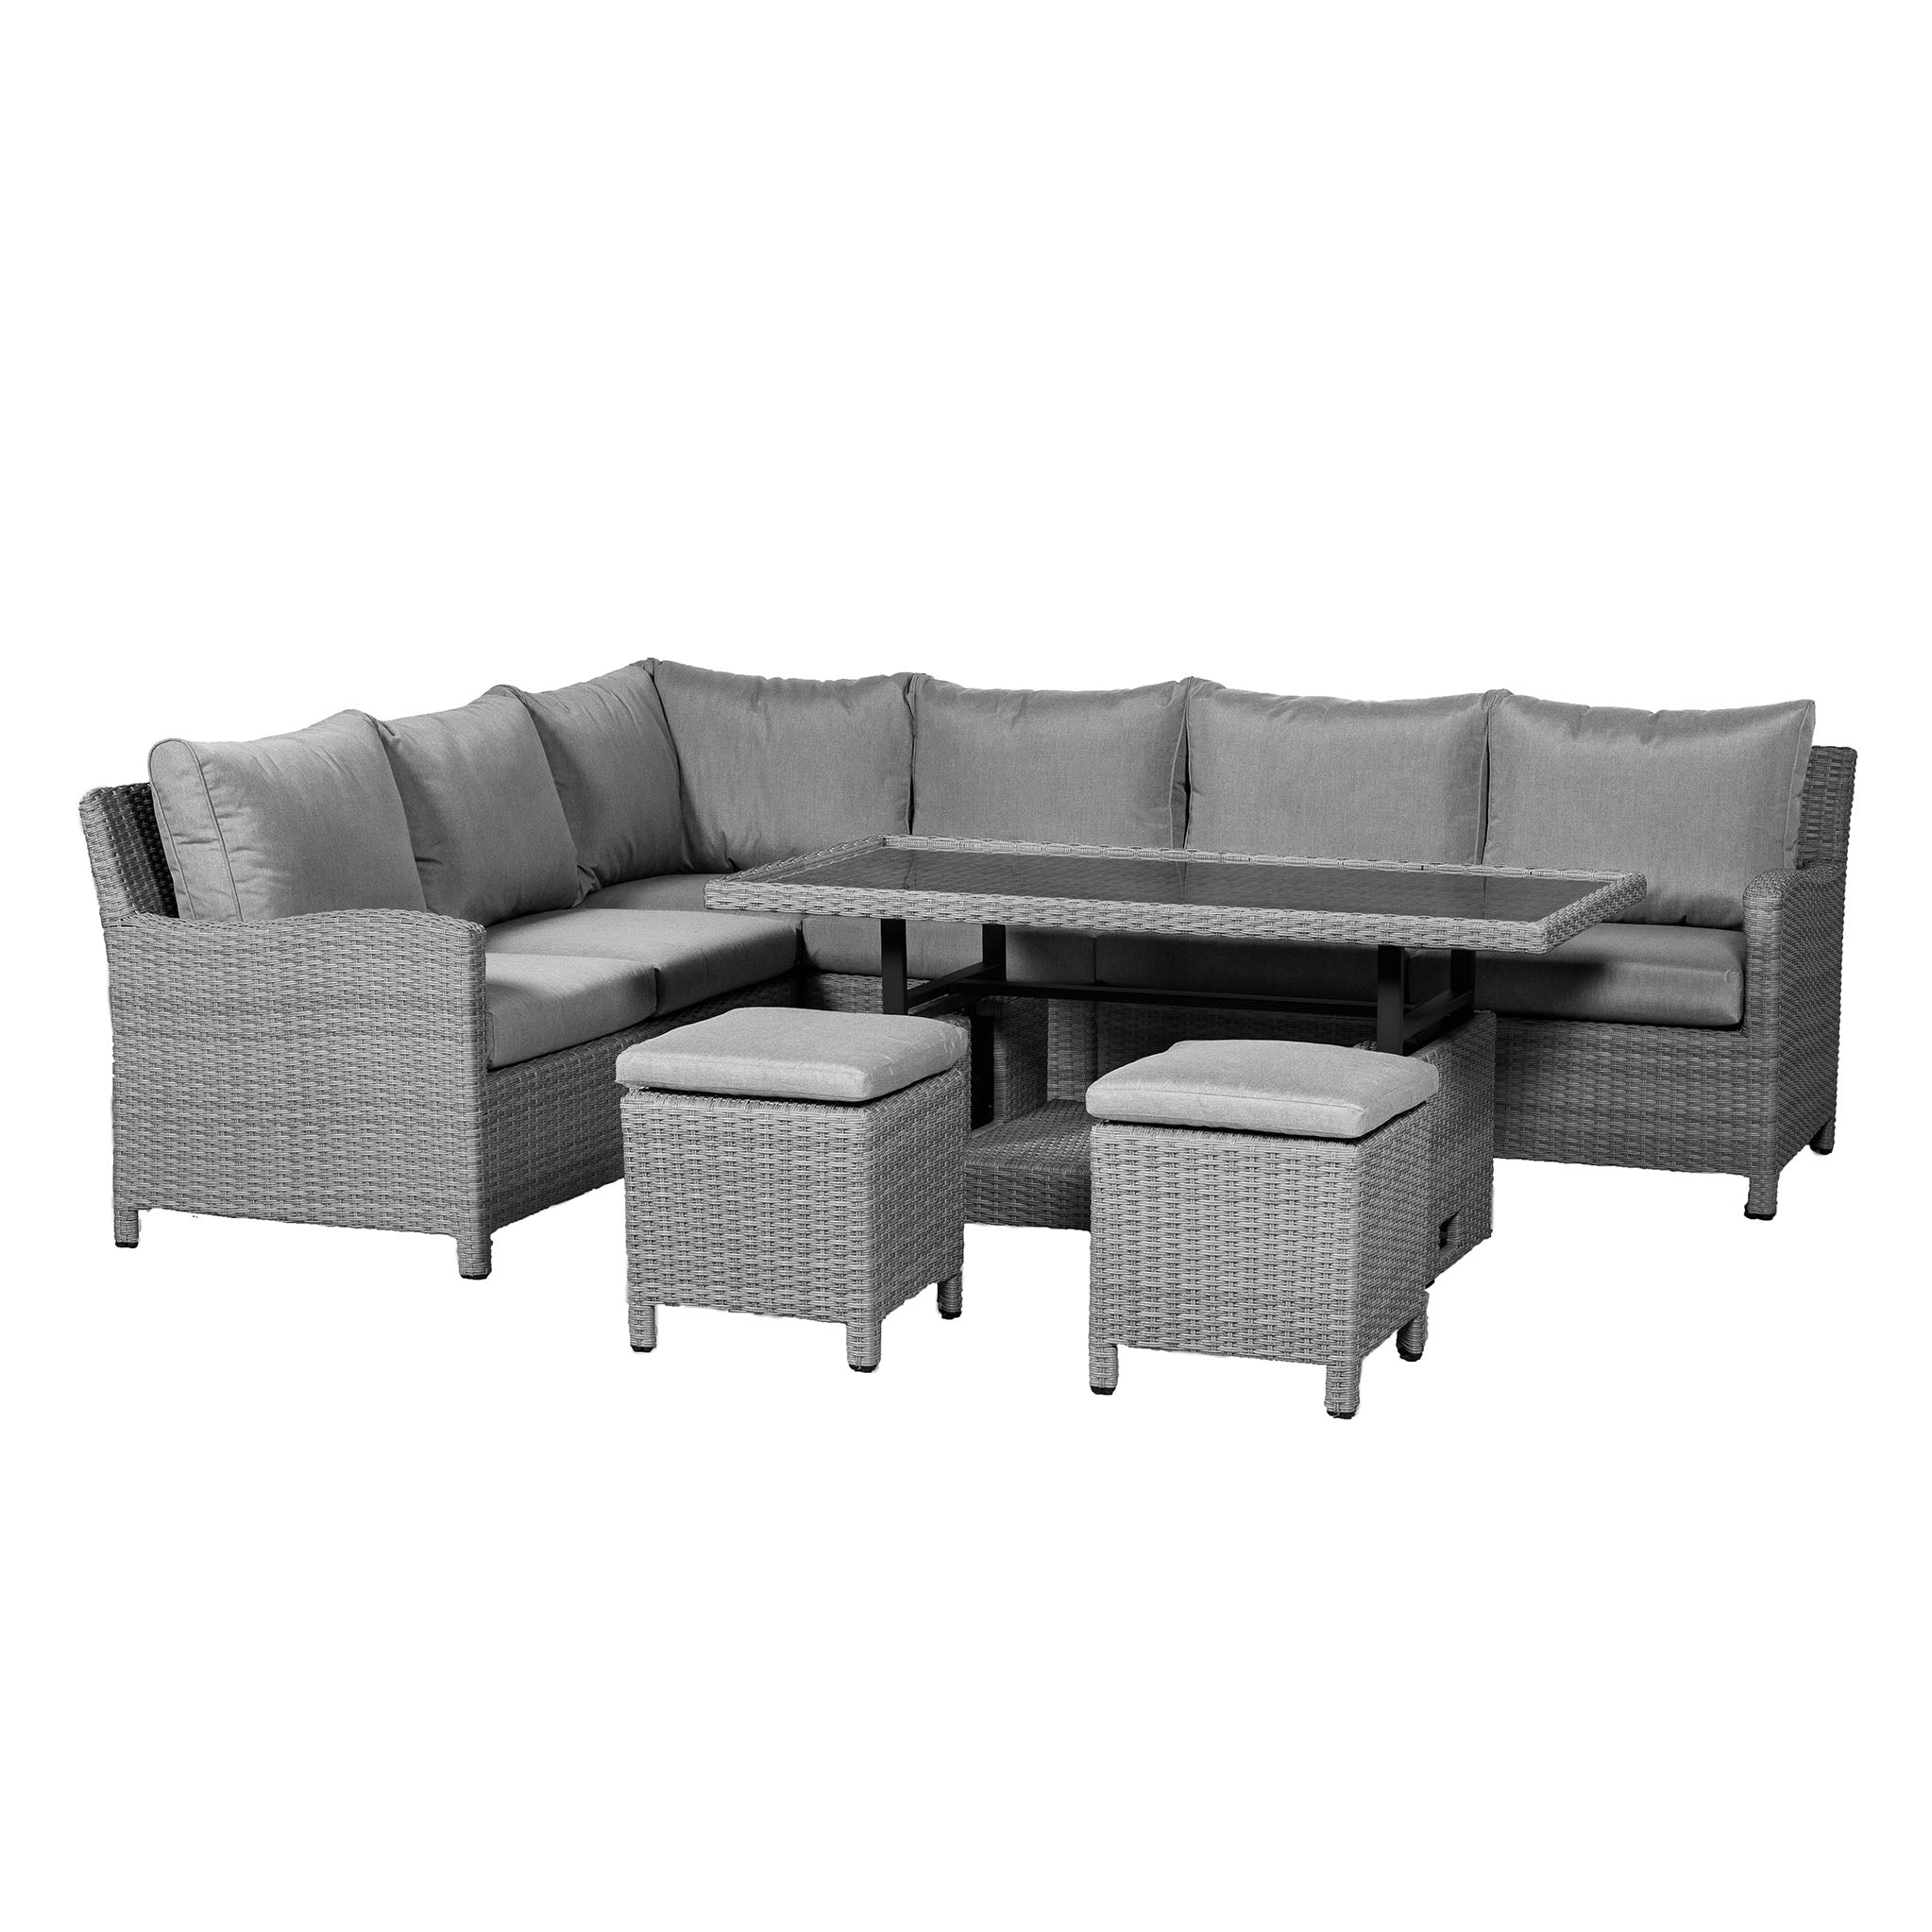 Paris Rattan Lounge Dining Set With Rise And Fall Table Roseland